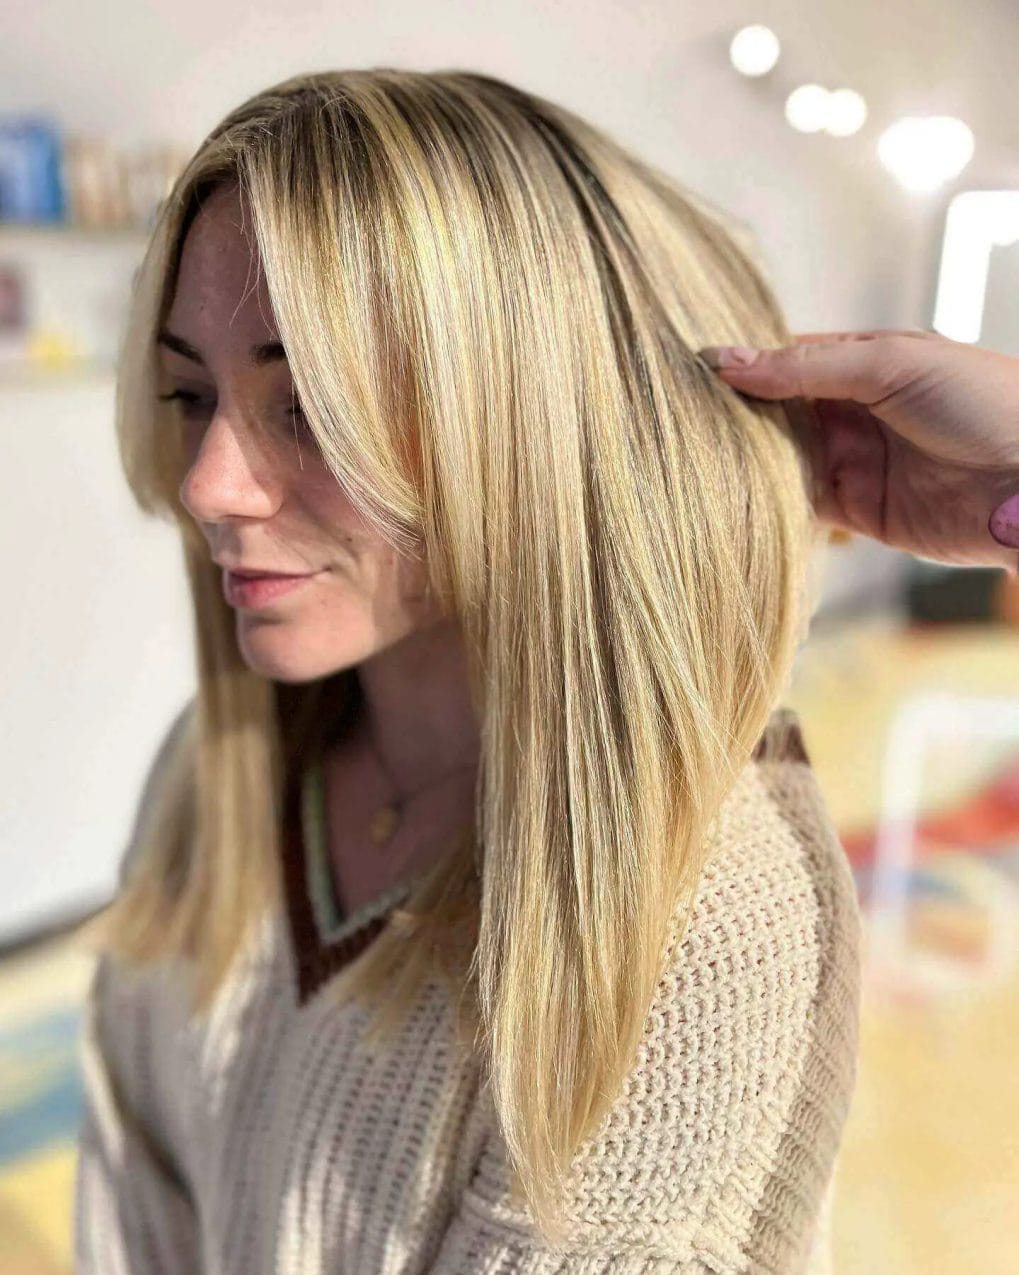 Honeyed blonde highlights in a sleek, straight medium hairstyle without bangs.